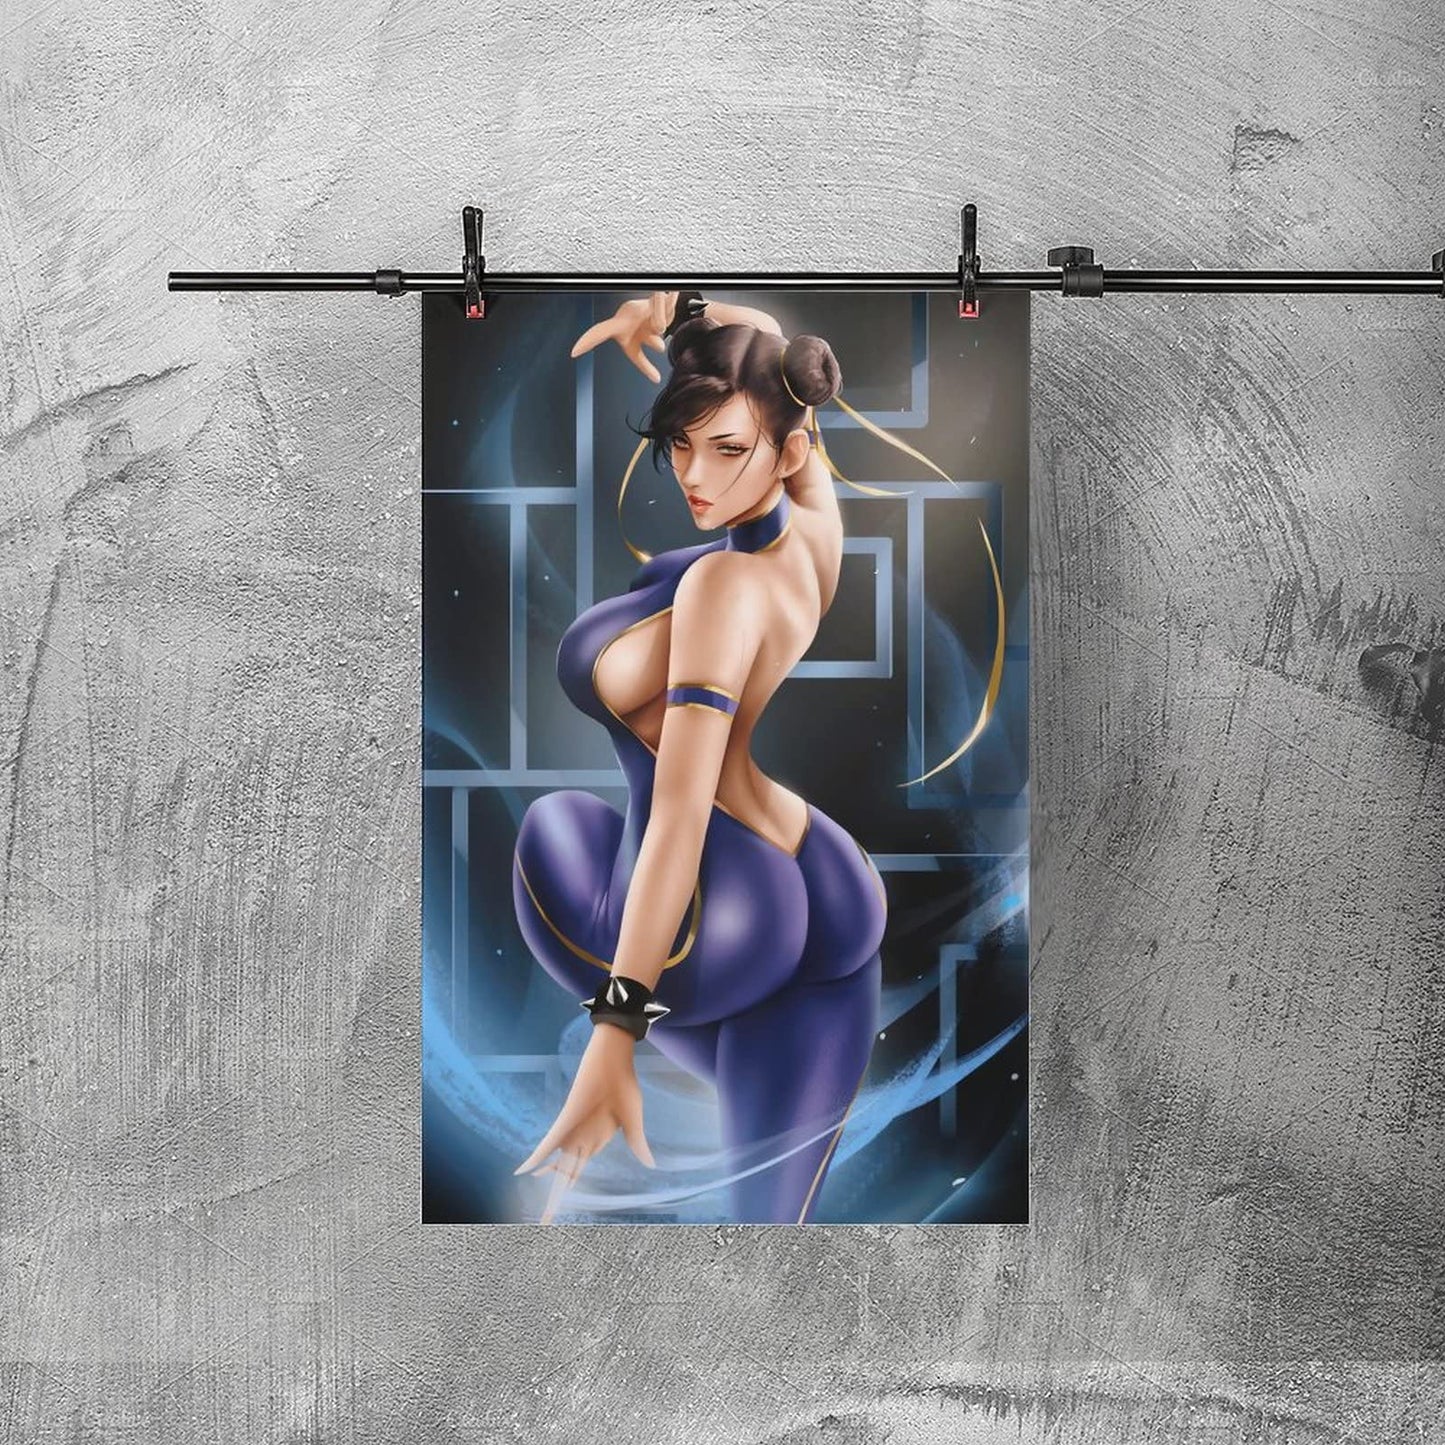 Sexy Anime Beauty Chun Li Canvas Poster Poster Canvas Prints Wall Art Oil Painting Print on Cancvas for Living Room Decorations Unframe-Style 8x12inchs(20x30cm)